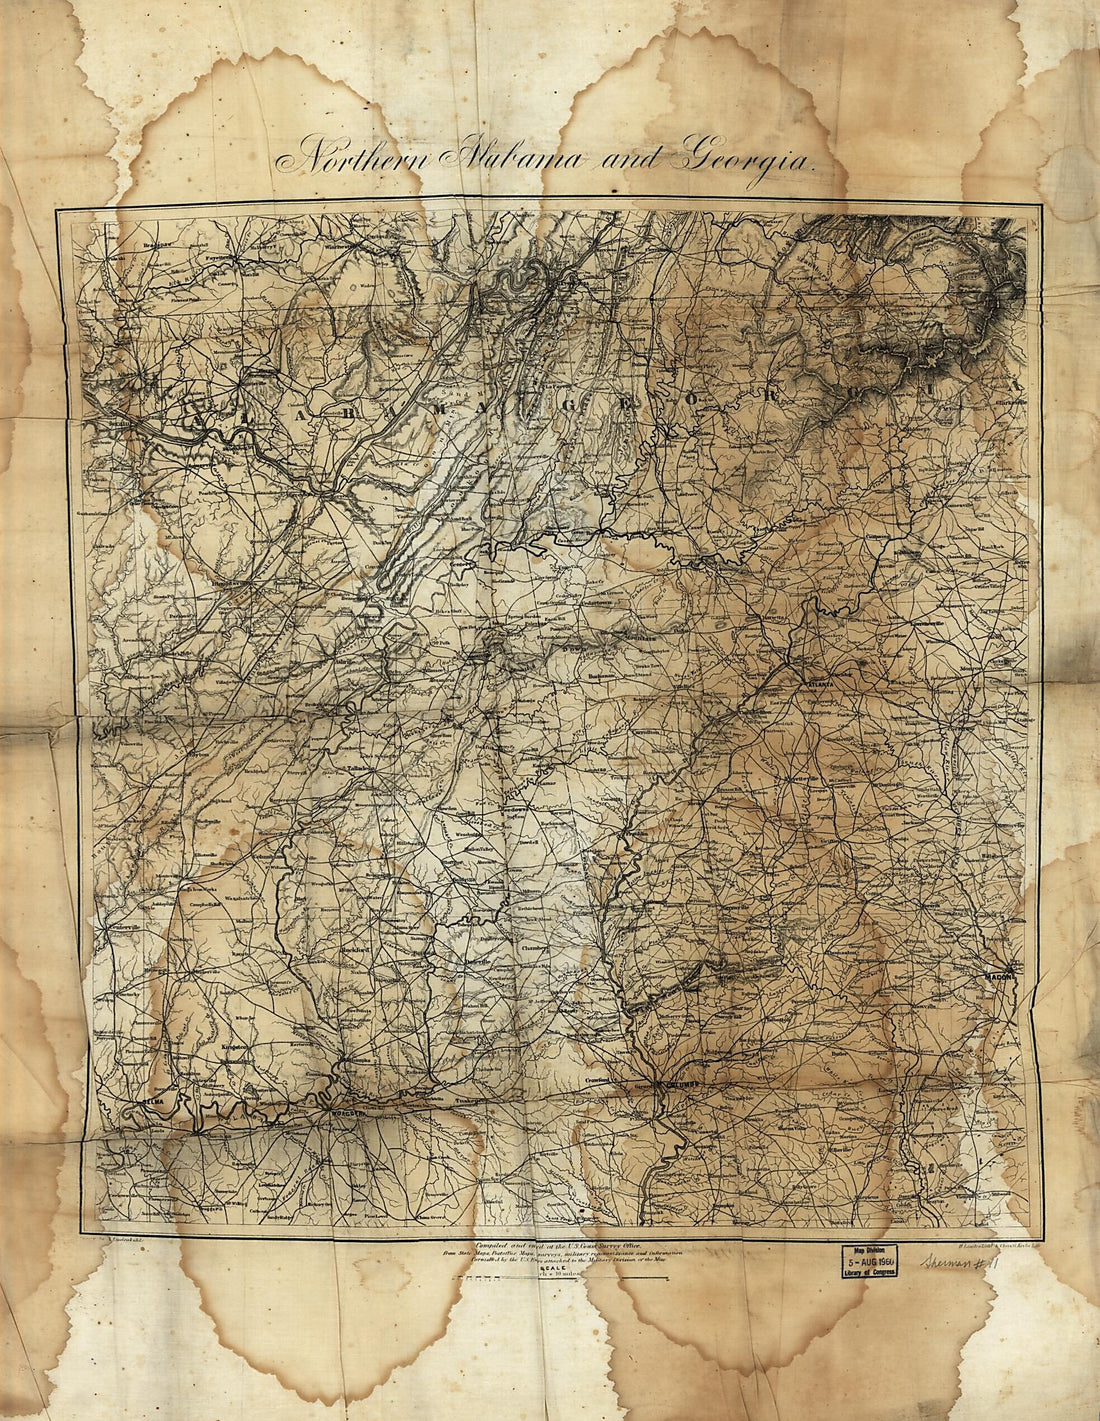 This old map of Northern Alabama and Georgia from 1864 was created by Charles G. Krebs, A. Lindenkohl, H. (Henry) Lindenkohl,  United States Coast Survey in 1864